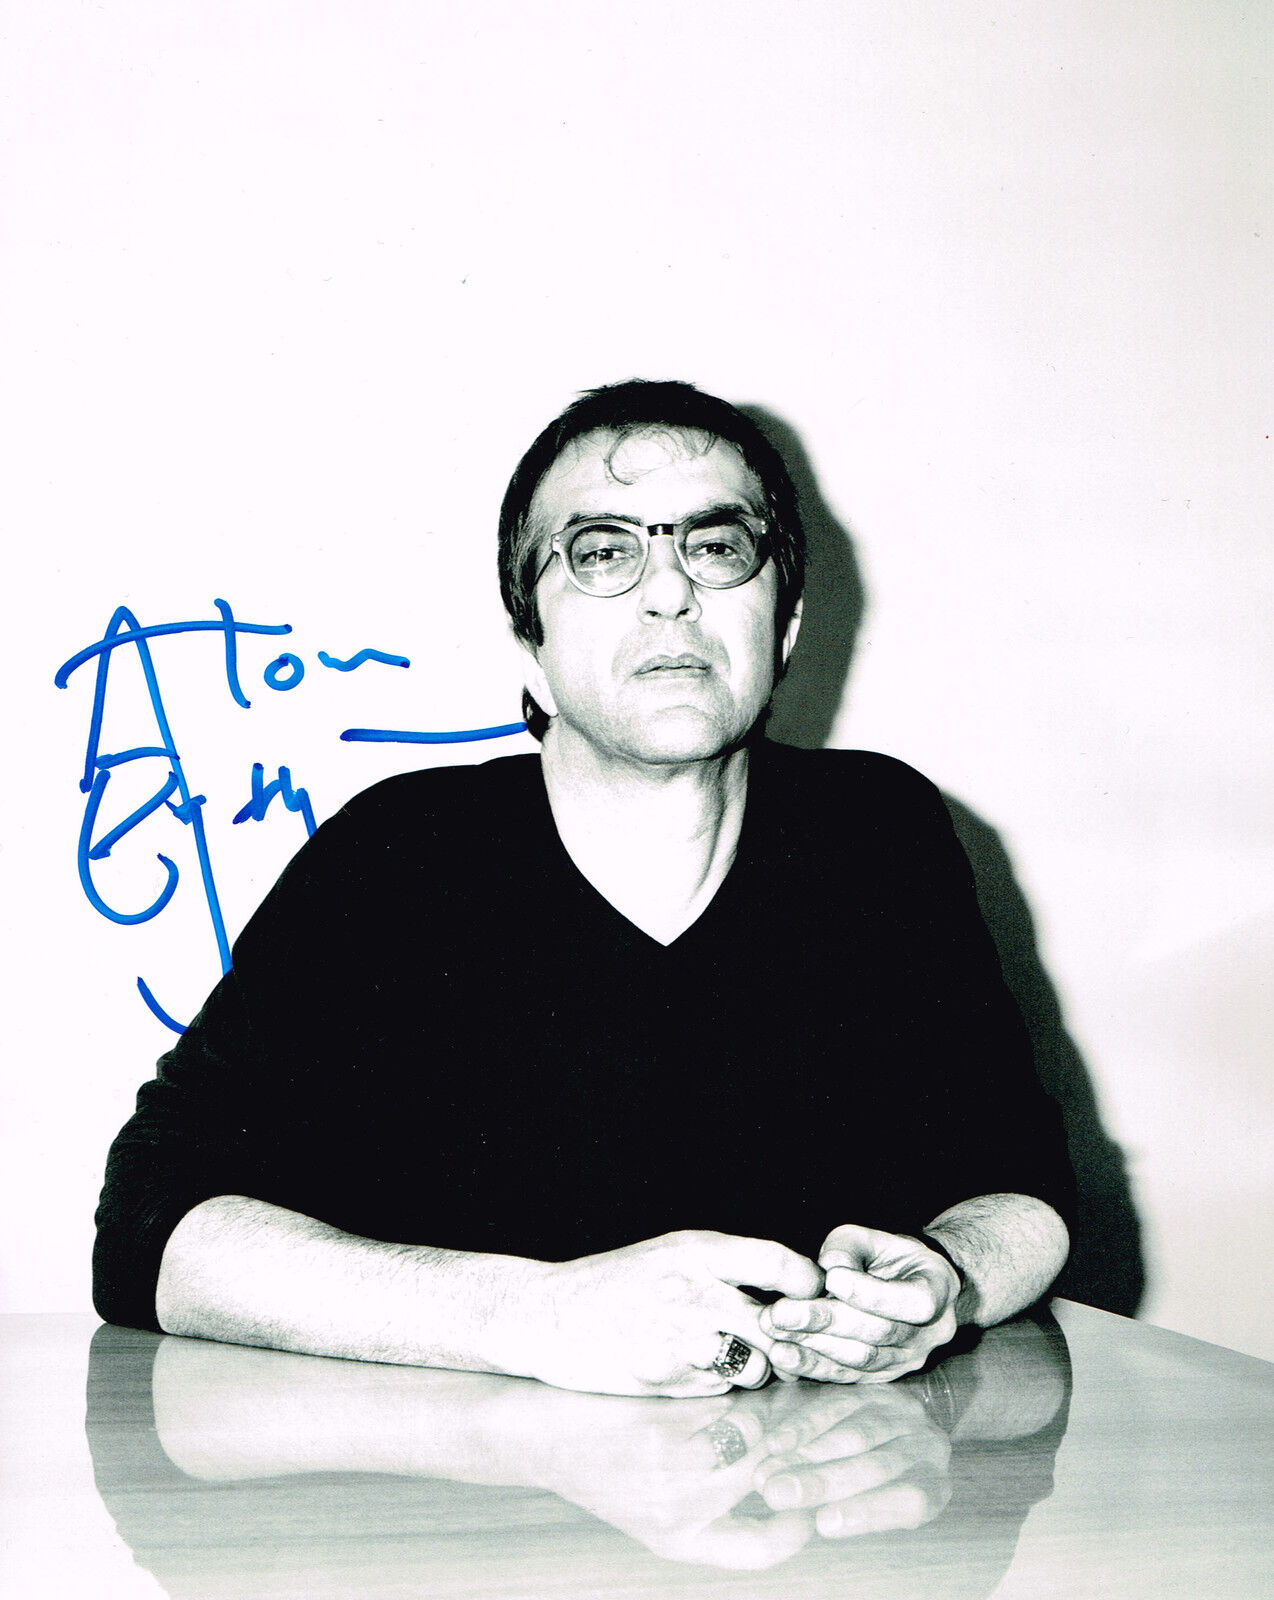 Atom Egoyan Hand Signed Autograph 8x10 Photo Poster painting In Person Movie Director Exotica